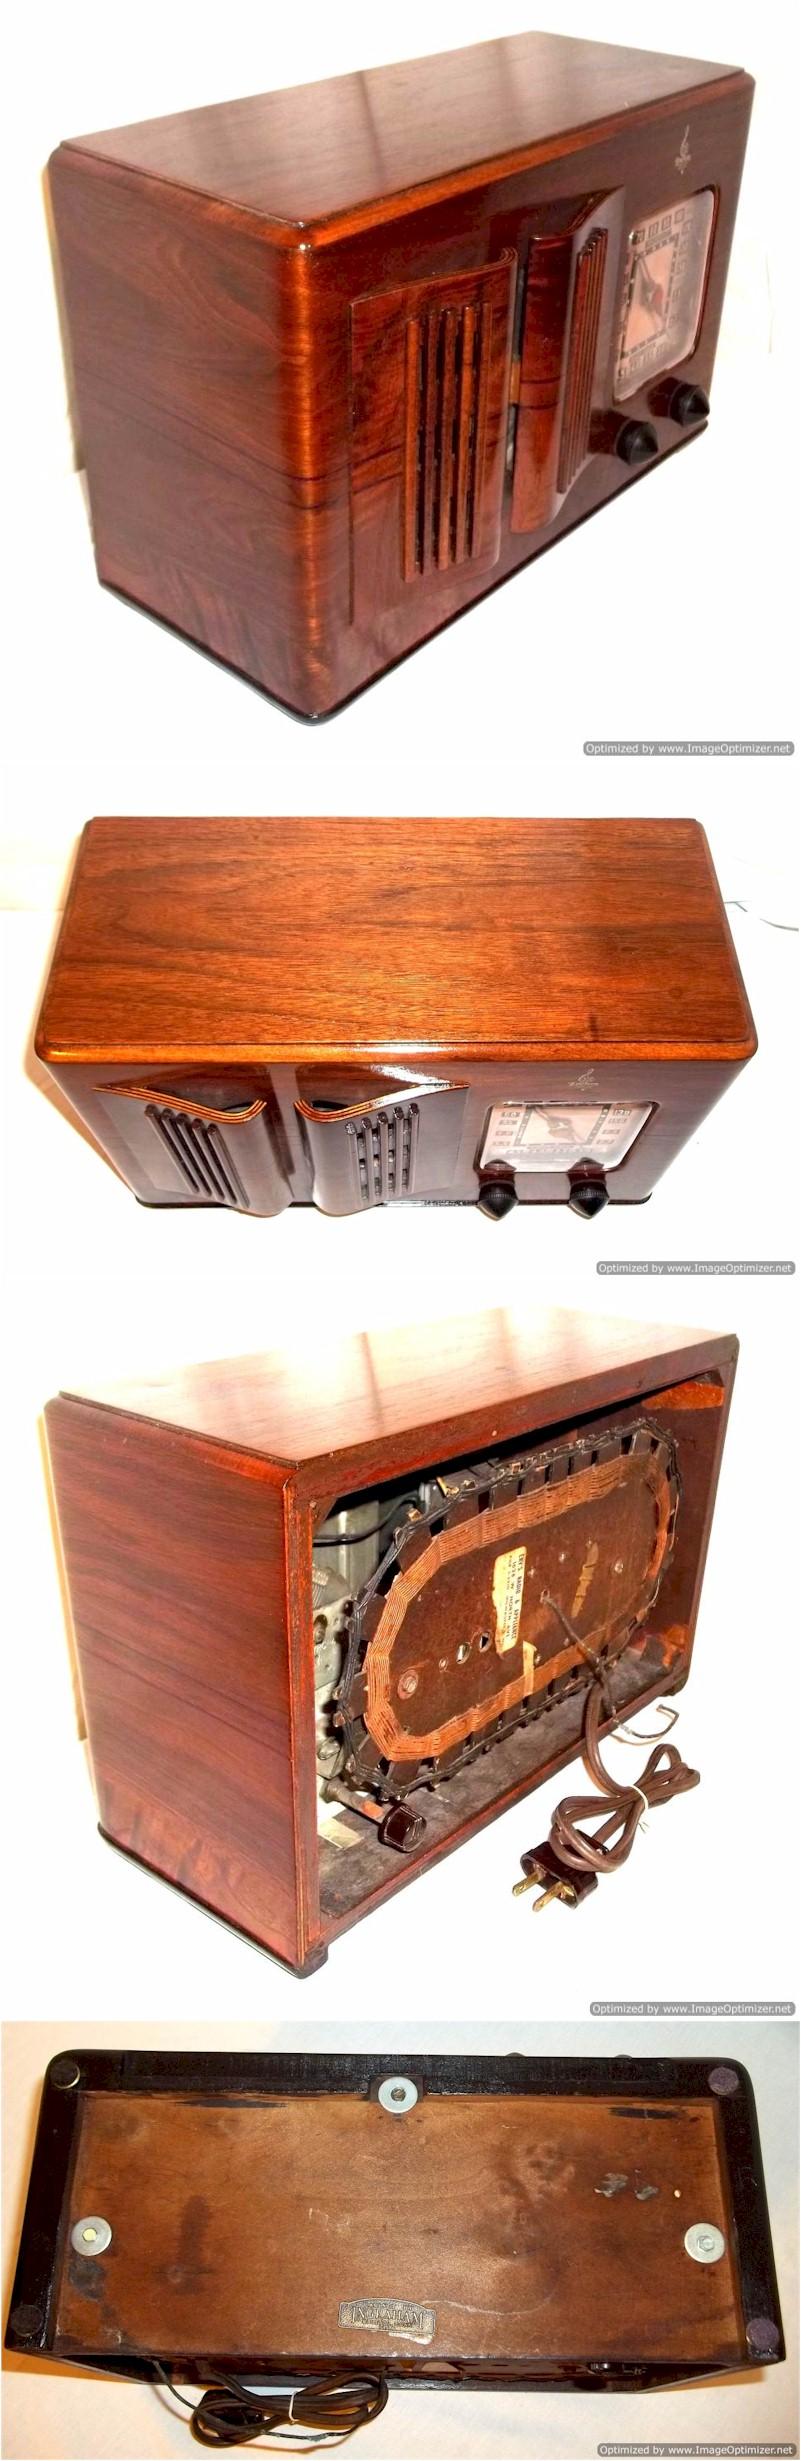 Emerson DY-349 w/Ingraham Cabinet (1941)